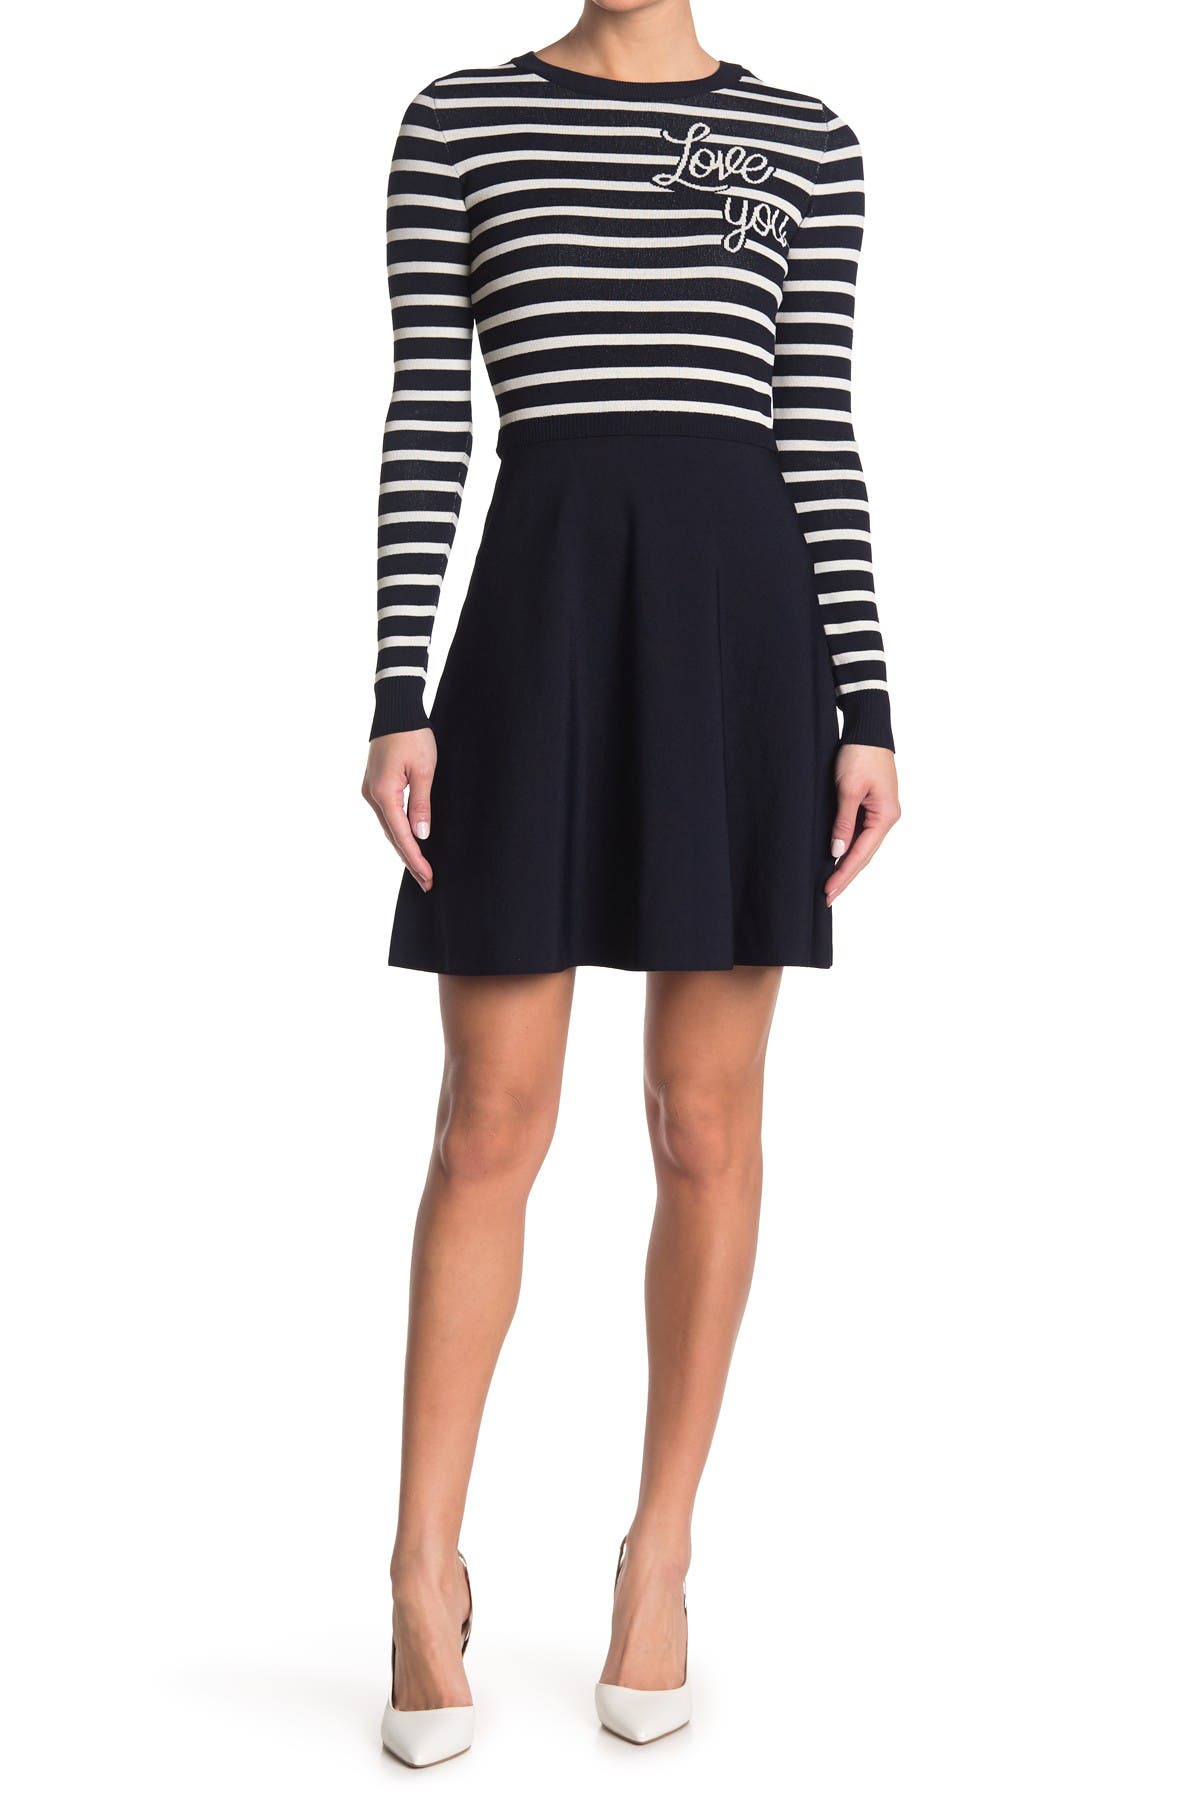 RED VALENTINO 'LOVE YOU' KNIT DRESS,8053341430786